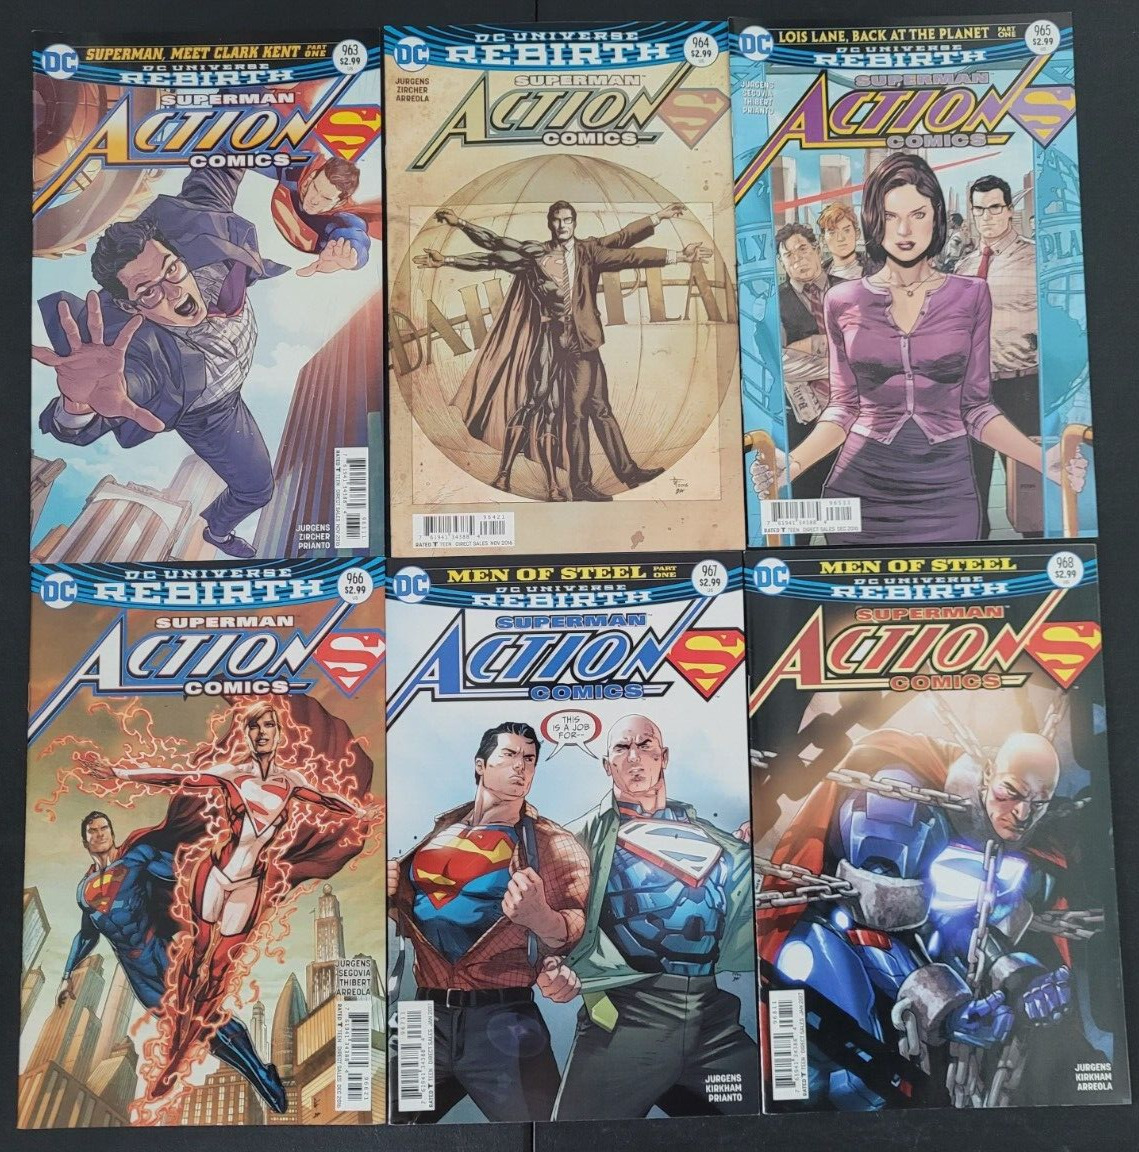 SUPERMAN IN ACTION COMICS SET OF 42 ISSUES (2016) RANGING #963-1016 1000 LEX